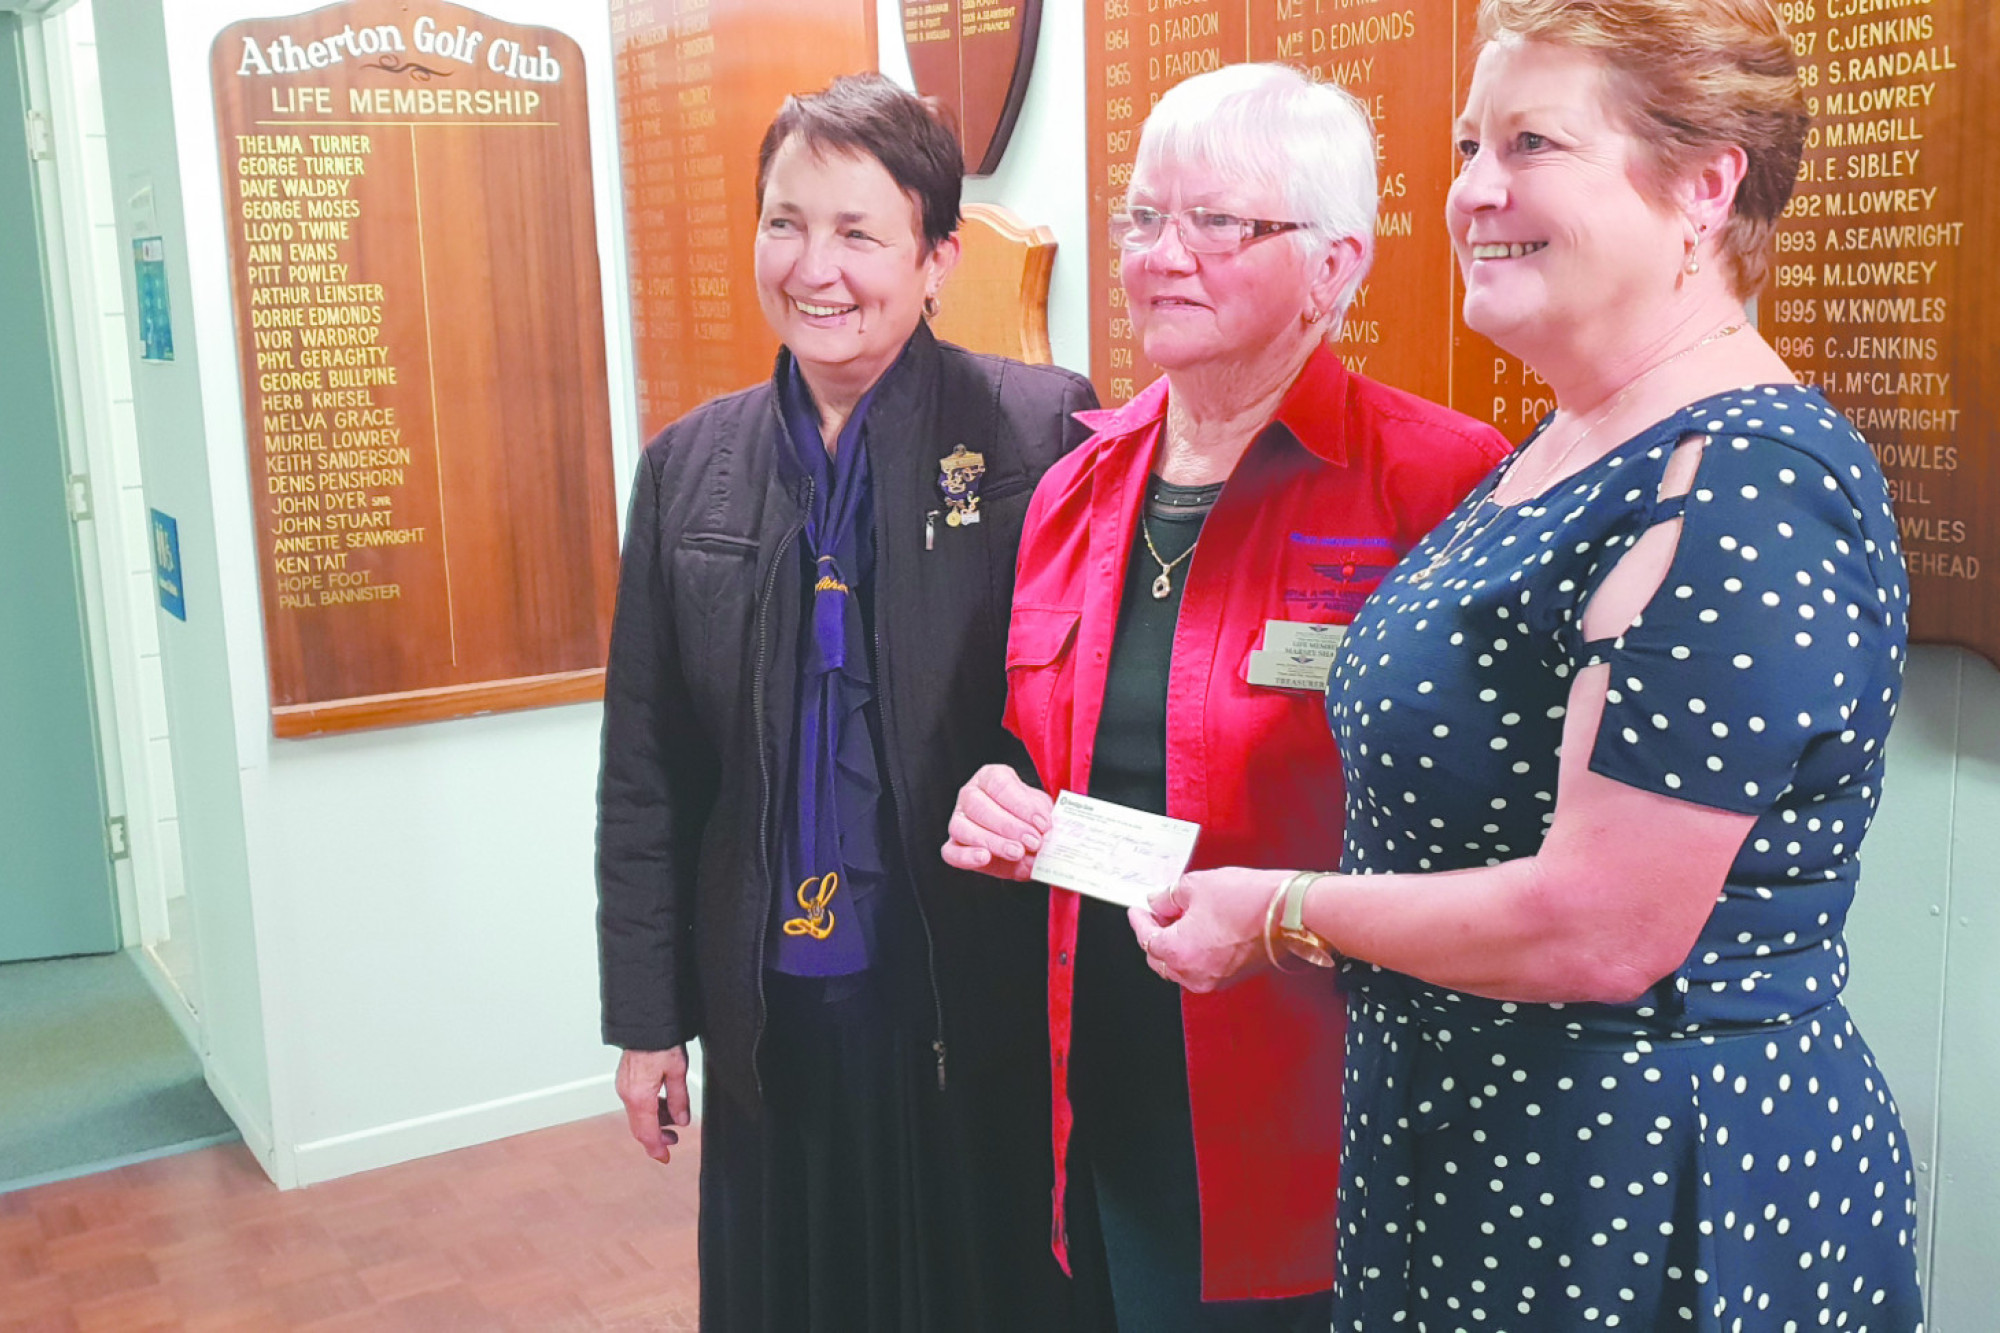 RFDS Near and Far Volunteer Auxiliary Treasurer Marsey Shand, centre, receiving the donation from Atherton Lioness President Tracey Curtis, right, and Treasurer Denise McGucken, left, who is also a joint Treasurer of the RFDS Near and Far Volunteer Auxiliary.